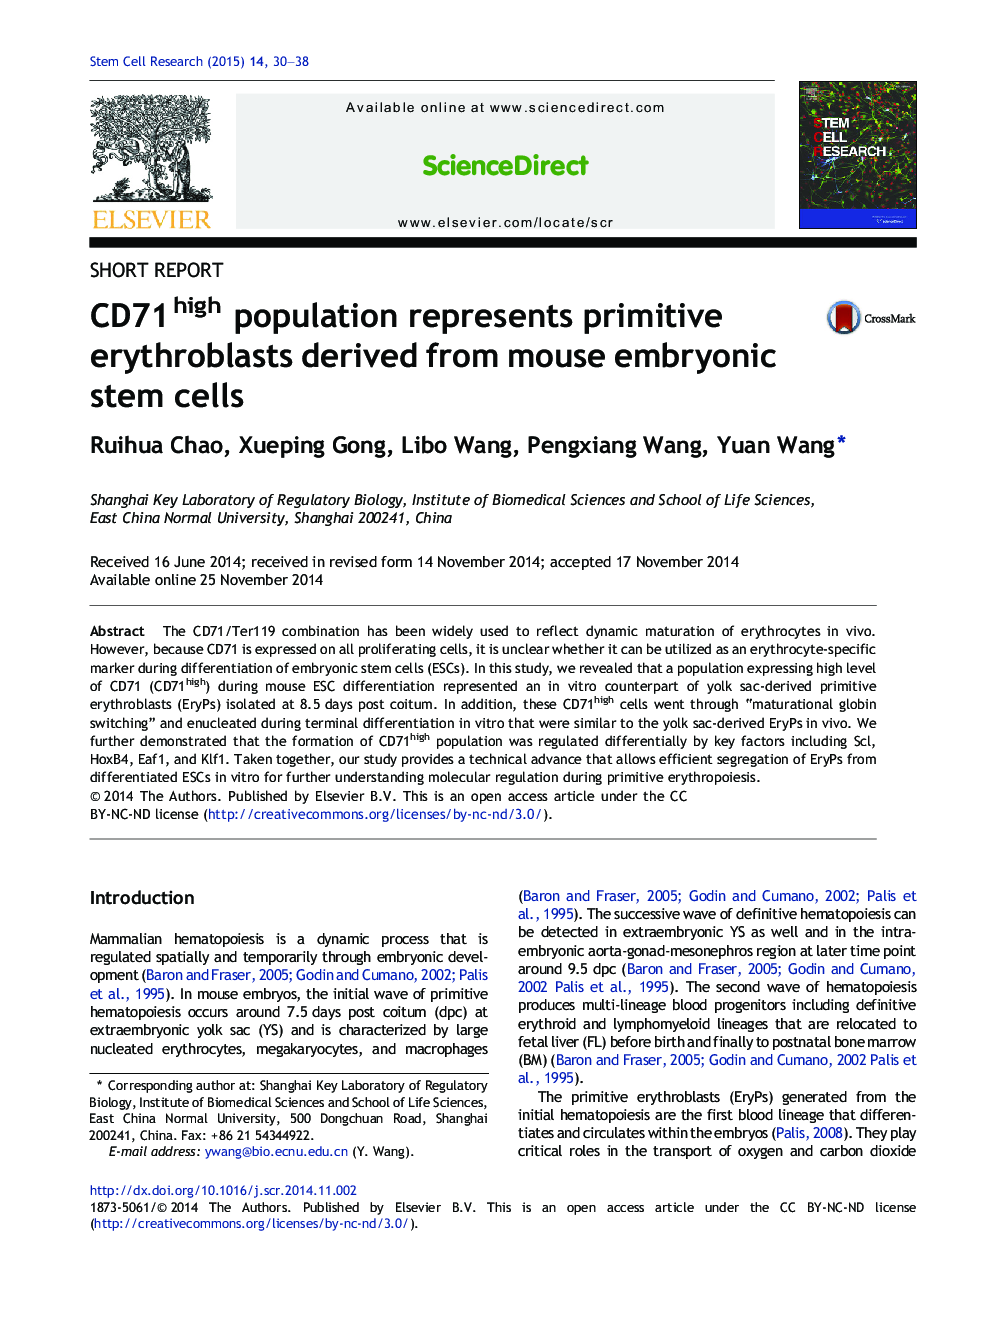 CD71high population represents primitive erythroblasts derived from mouse embryonic stem cells